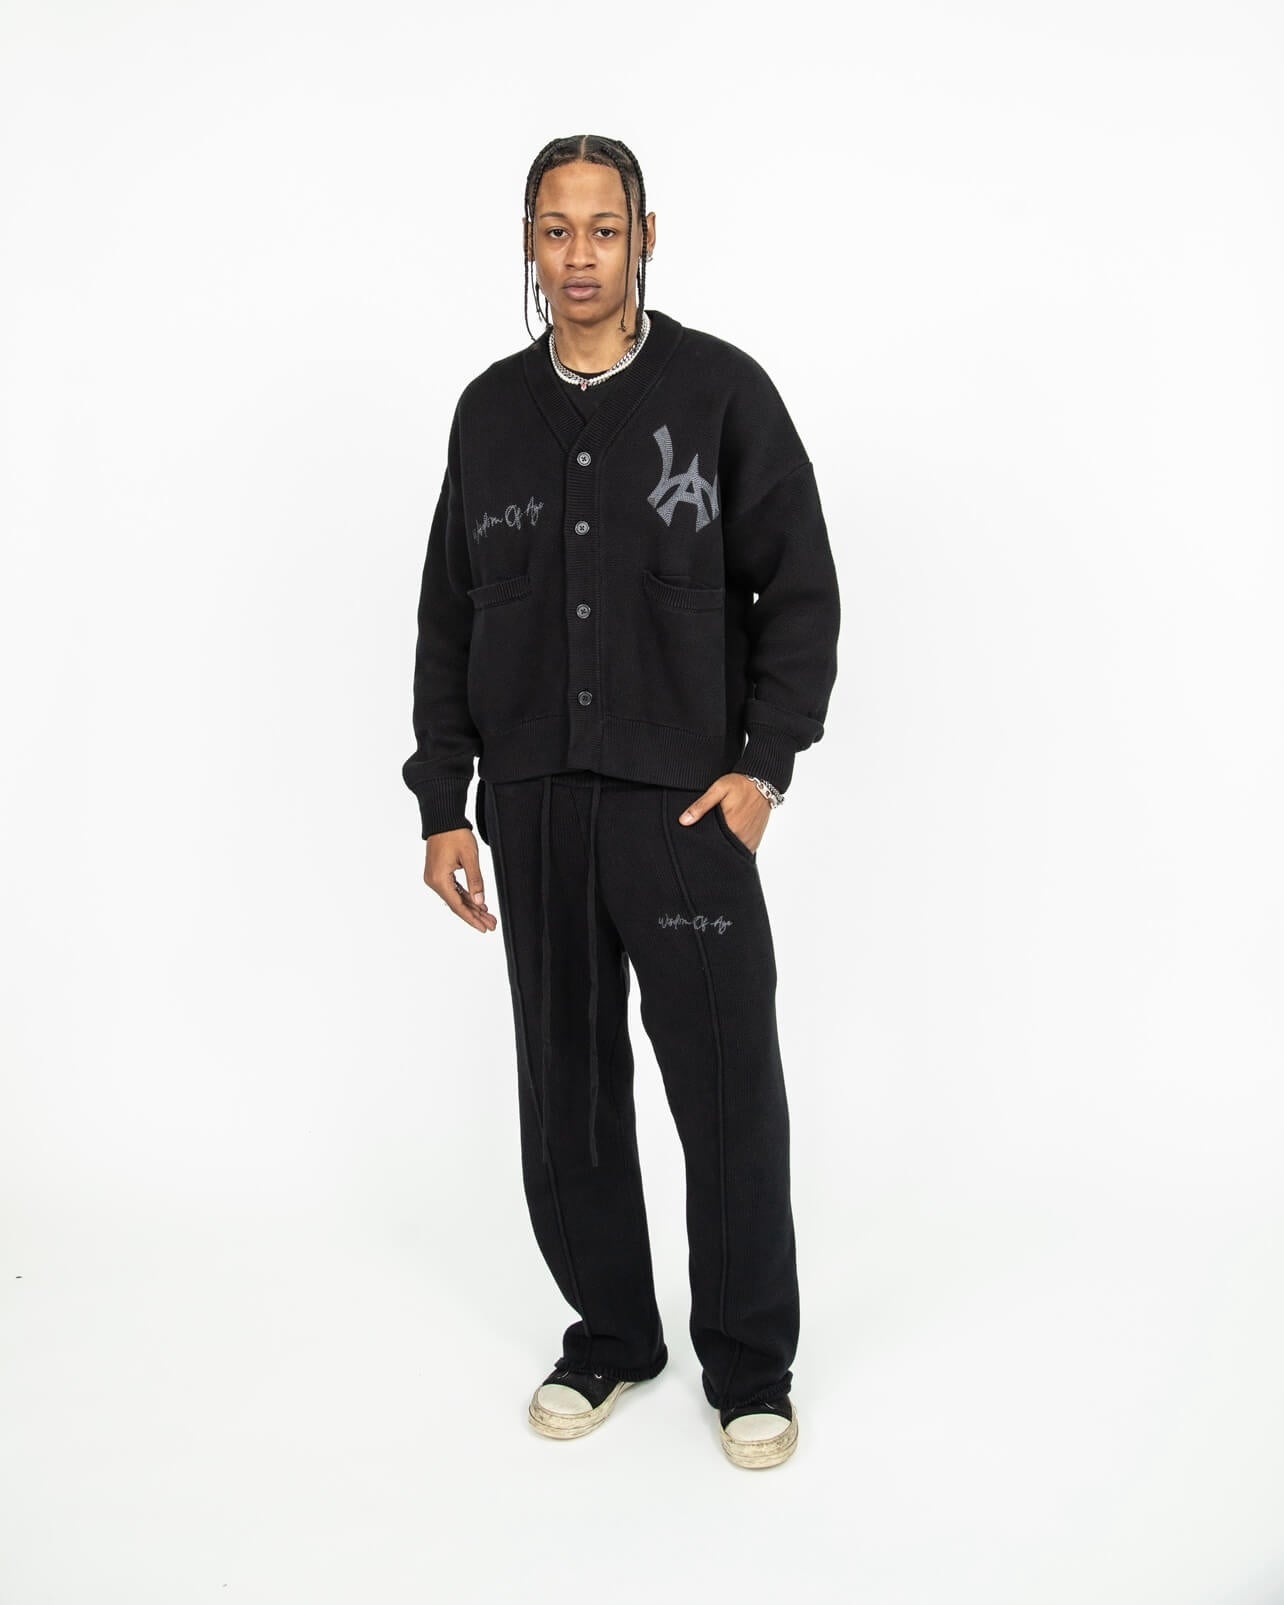 Front Profile of a model wearing the Black Cat City Cardigan paired with the Knit Sweatpants in Black